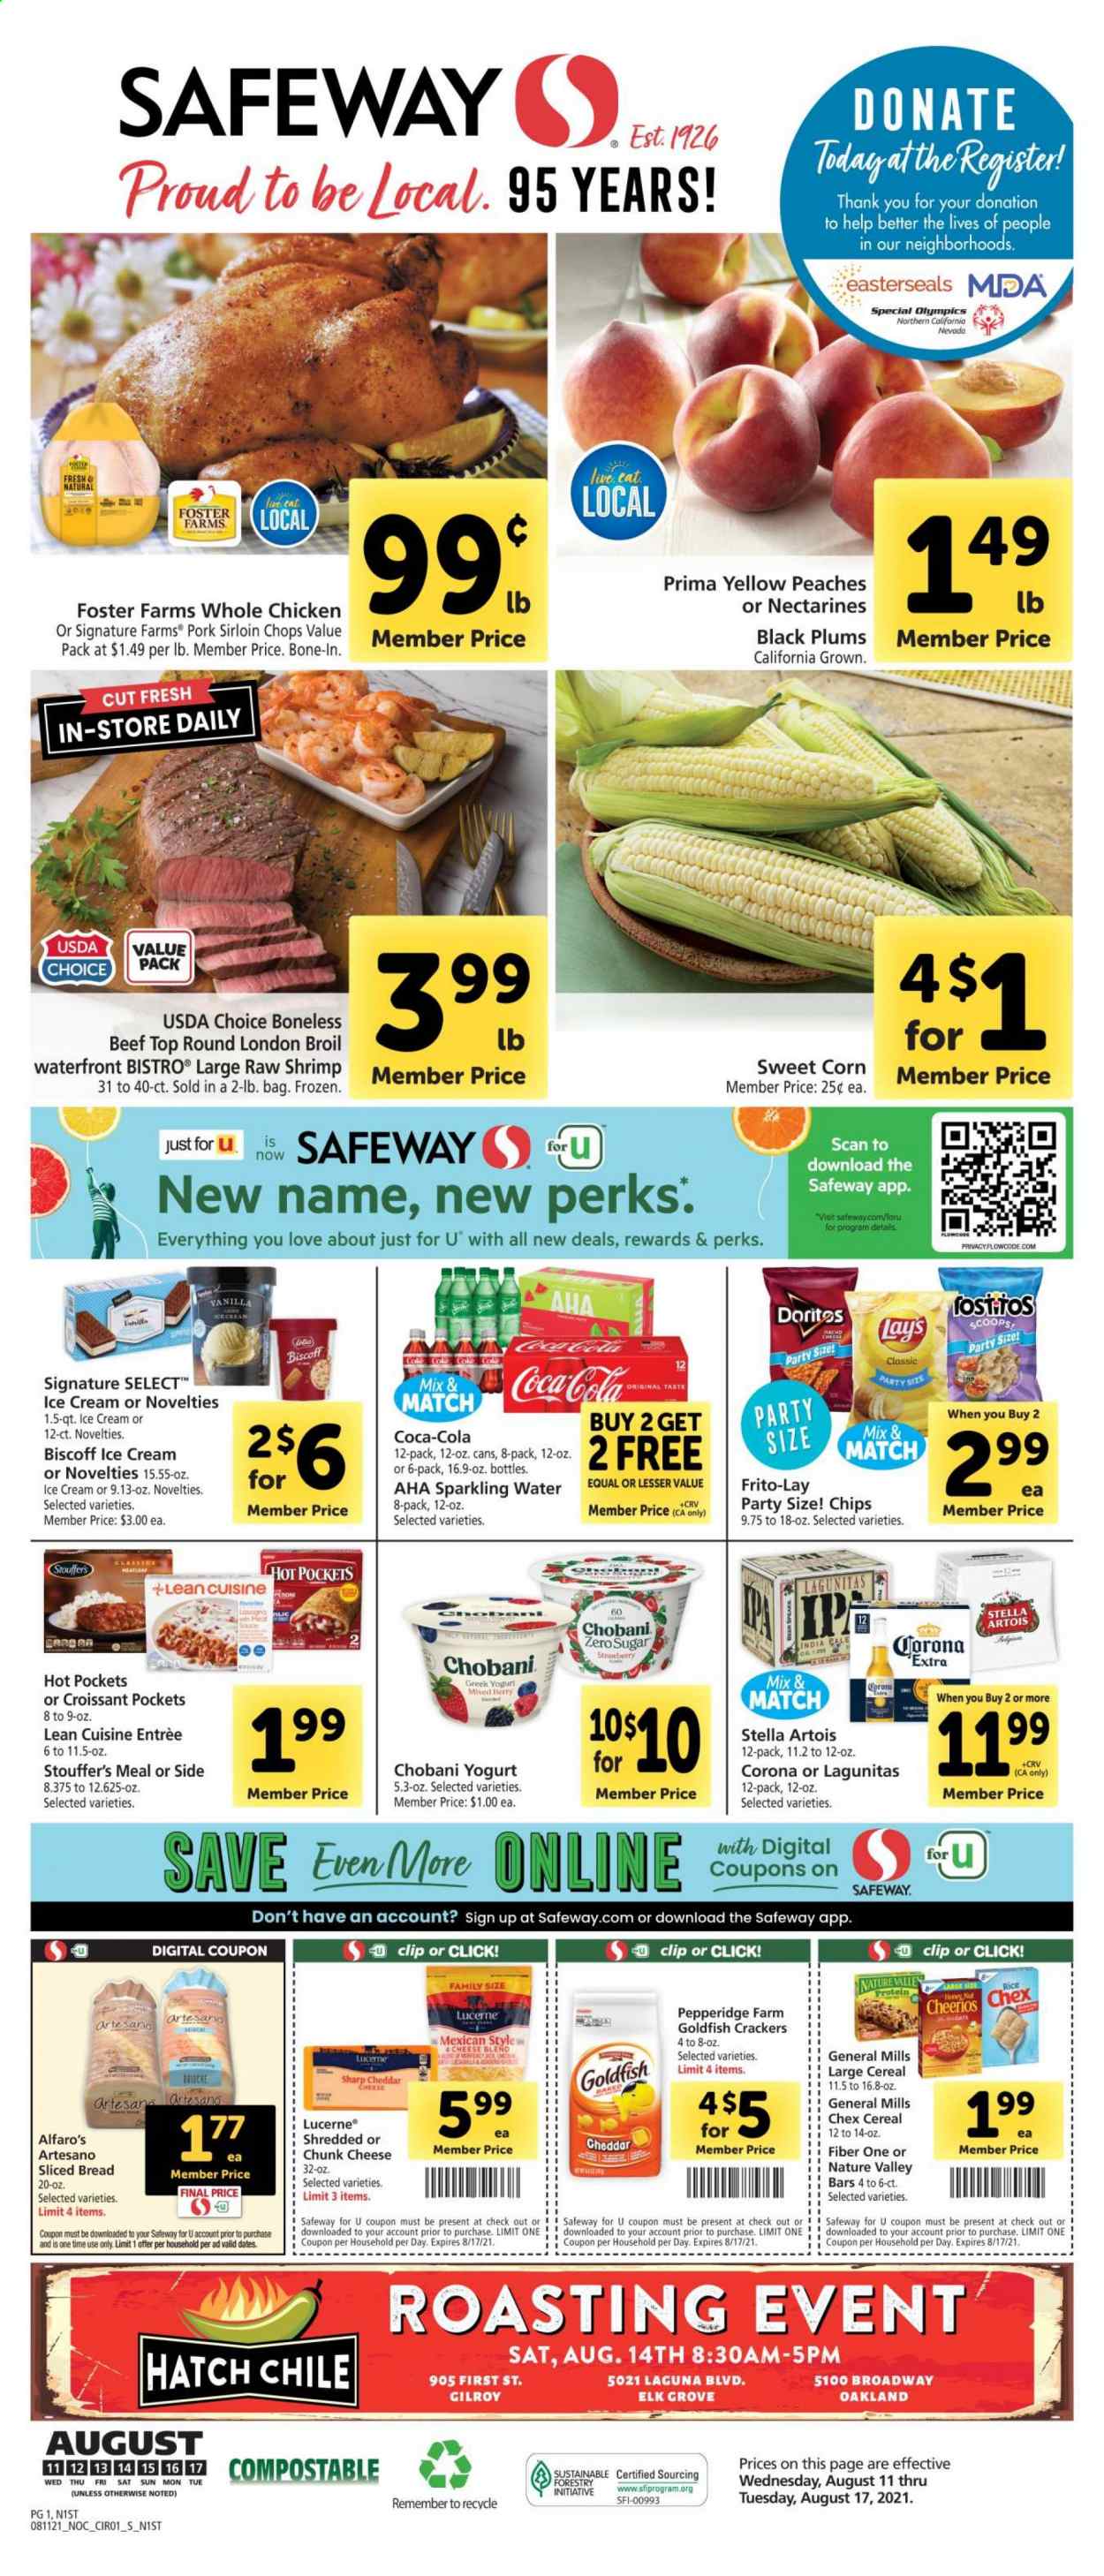 thumbnail - Safeway Flyer - 08/11/2021 - 08/17/2021 - Sales products - plums, bread, croissant, corn, sweet corn, whole chicken, pork loin, shrimps, hot pocket, sauce, Lean Cuisine, chunk cheese, greek yoghurt, yoghurt, Chobani, ice cream, Stouffer's, crackers, Lay’s, Goldfish, Frito-Lay, cereals, Cheerios, Nature Valley, Fiber One, rice, Coca-Cola, sparkling water, beer, Stella Artois, Corona Extra, nectarines, black plums, peaches. Page 1.